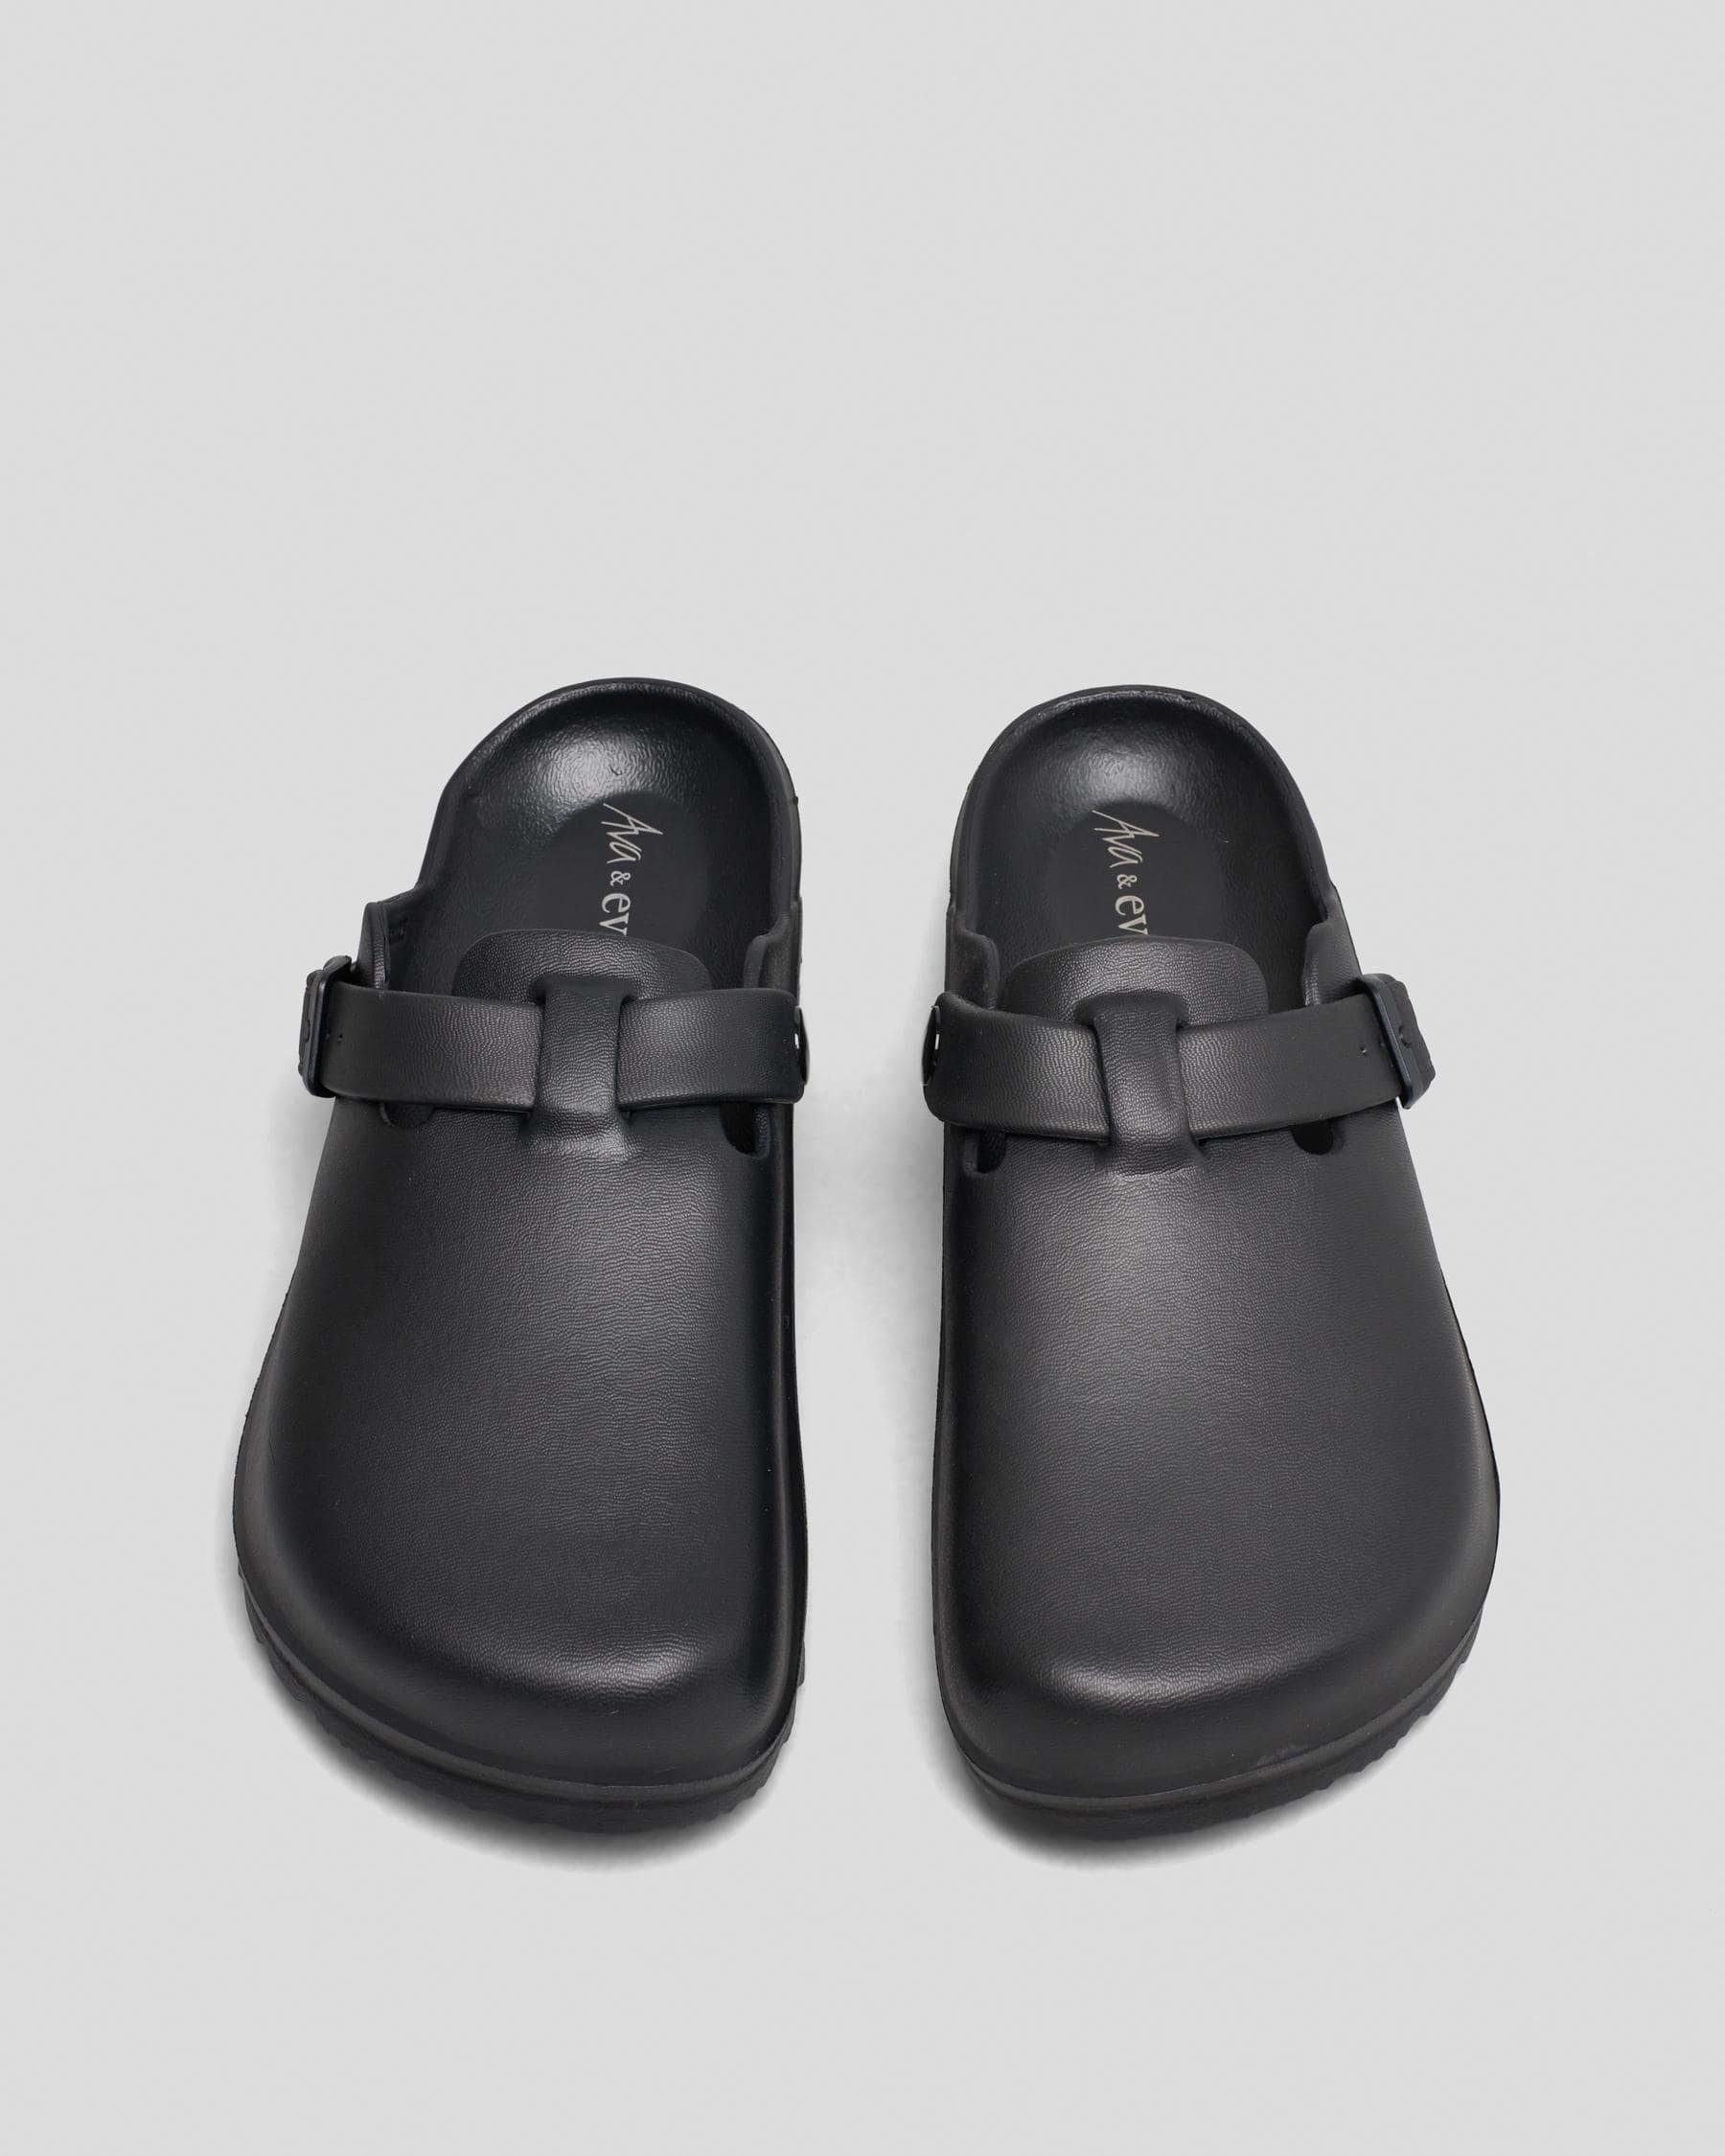 Ava And Ever Remi EVA Clog Slides In Black - FREE* Shipping & Easy ...